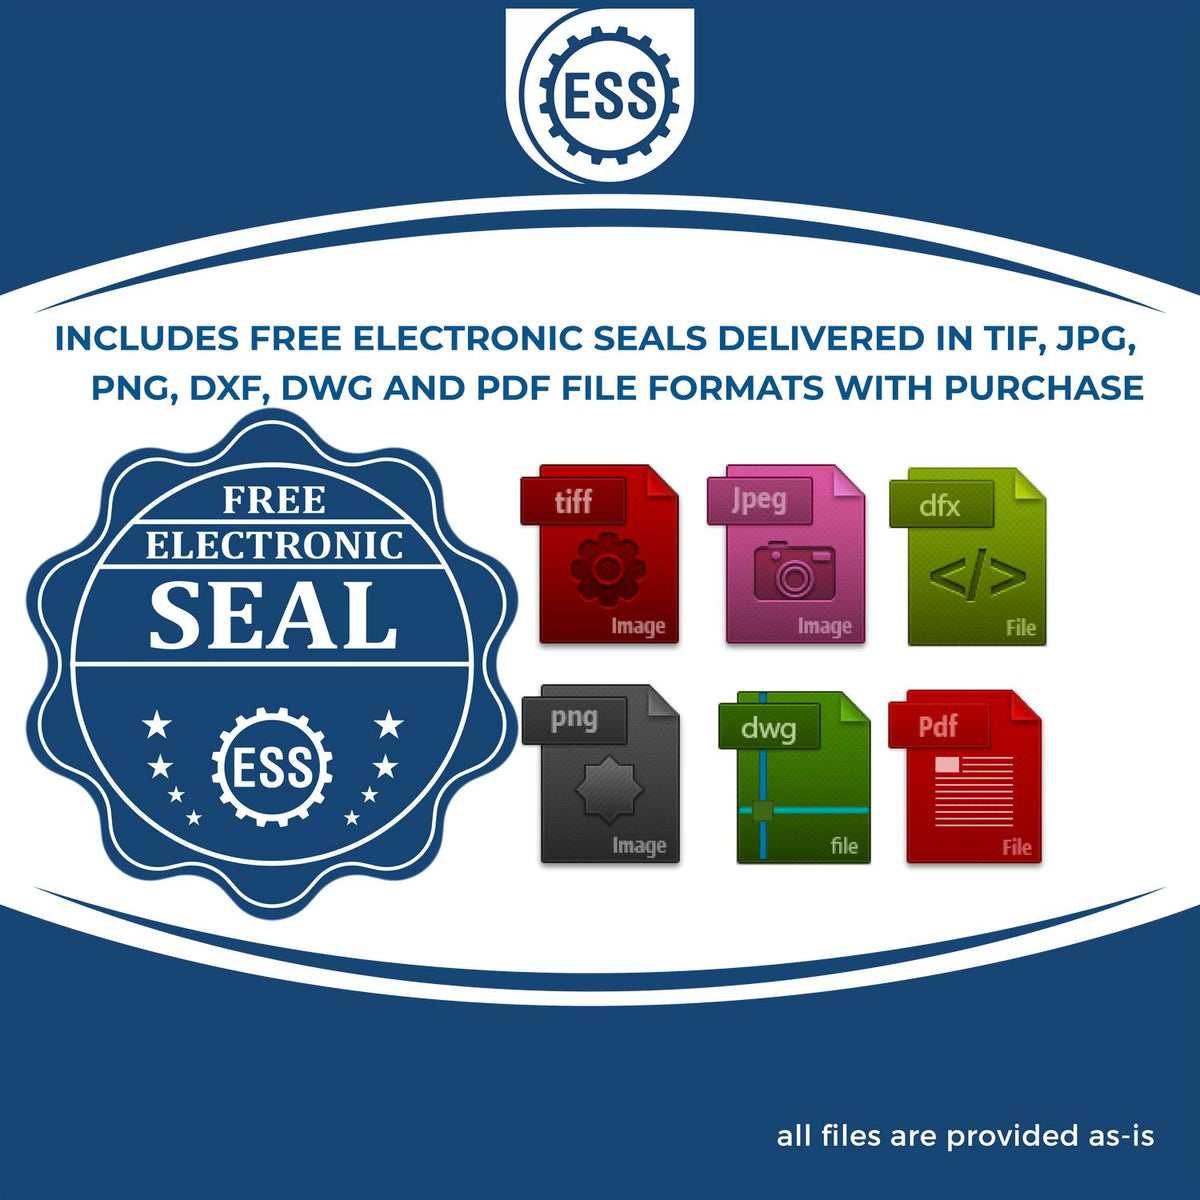 An infographic for the free electronic seal for the Heavy Duty Cast Iron Delaware Architect Embosser illustrating the different file type icons such as DXF, DWG, TIF, JPG and PNG.